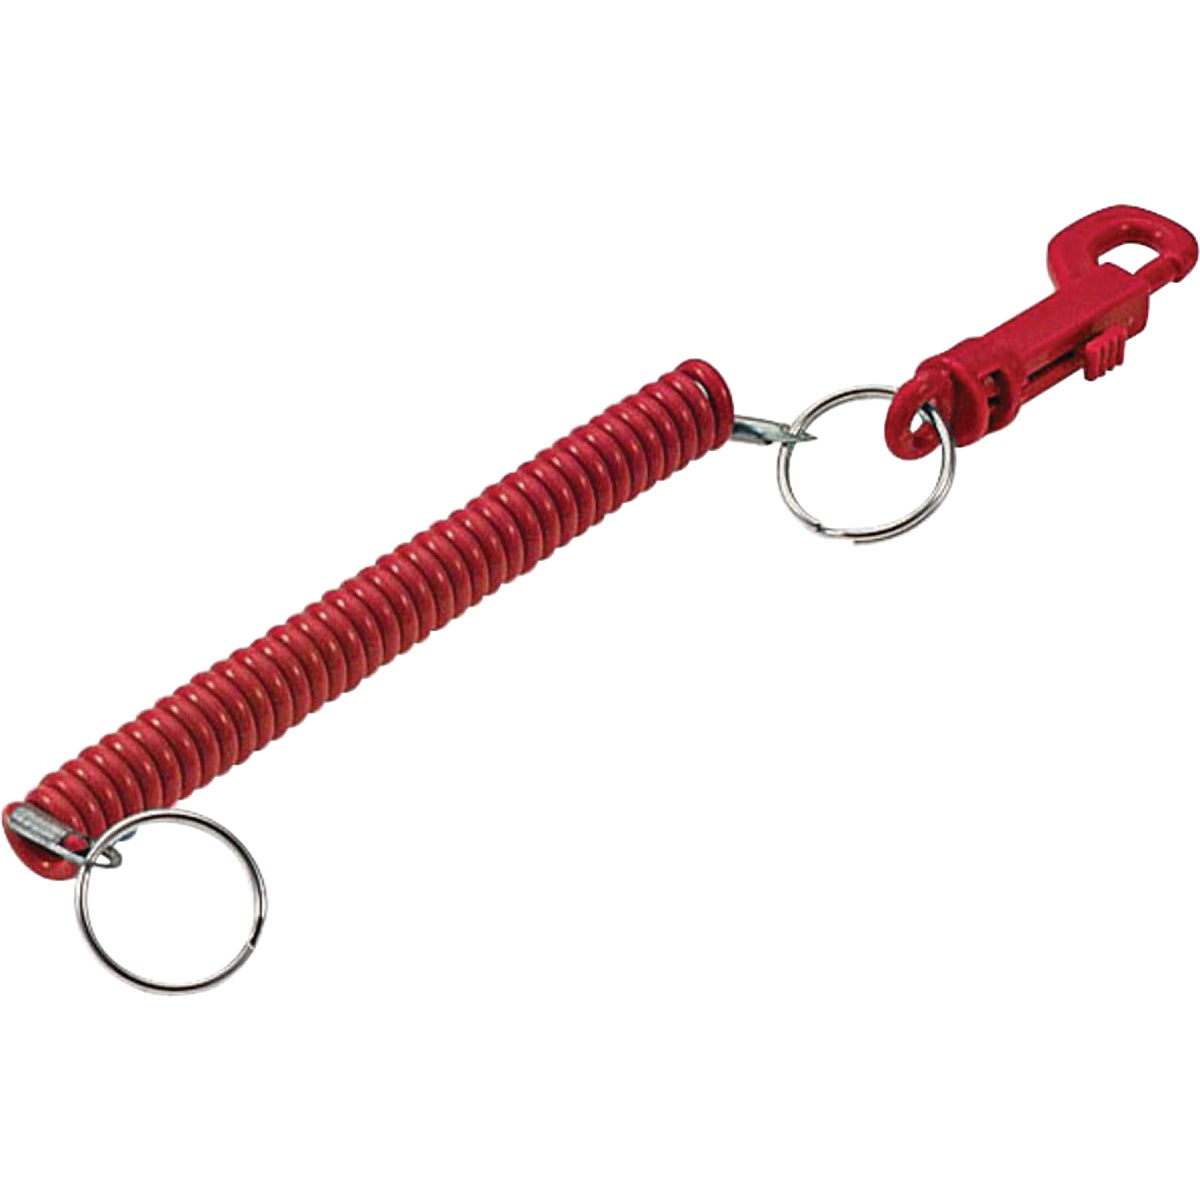 Item 572578, Plastic key clip with coil allows a wide variety of choices on where to 